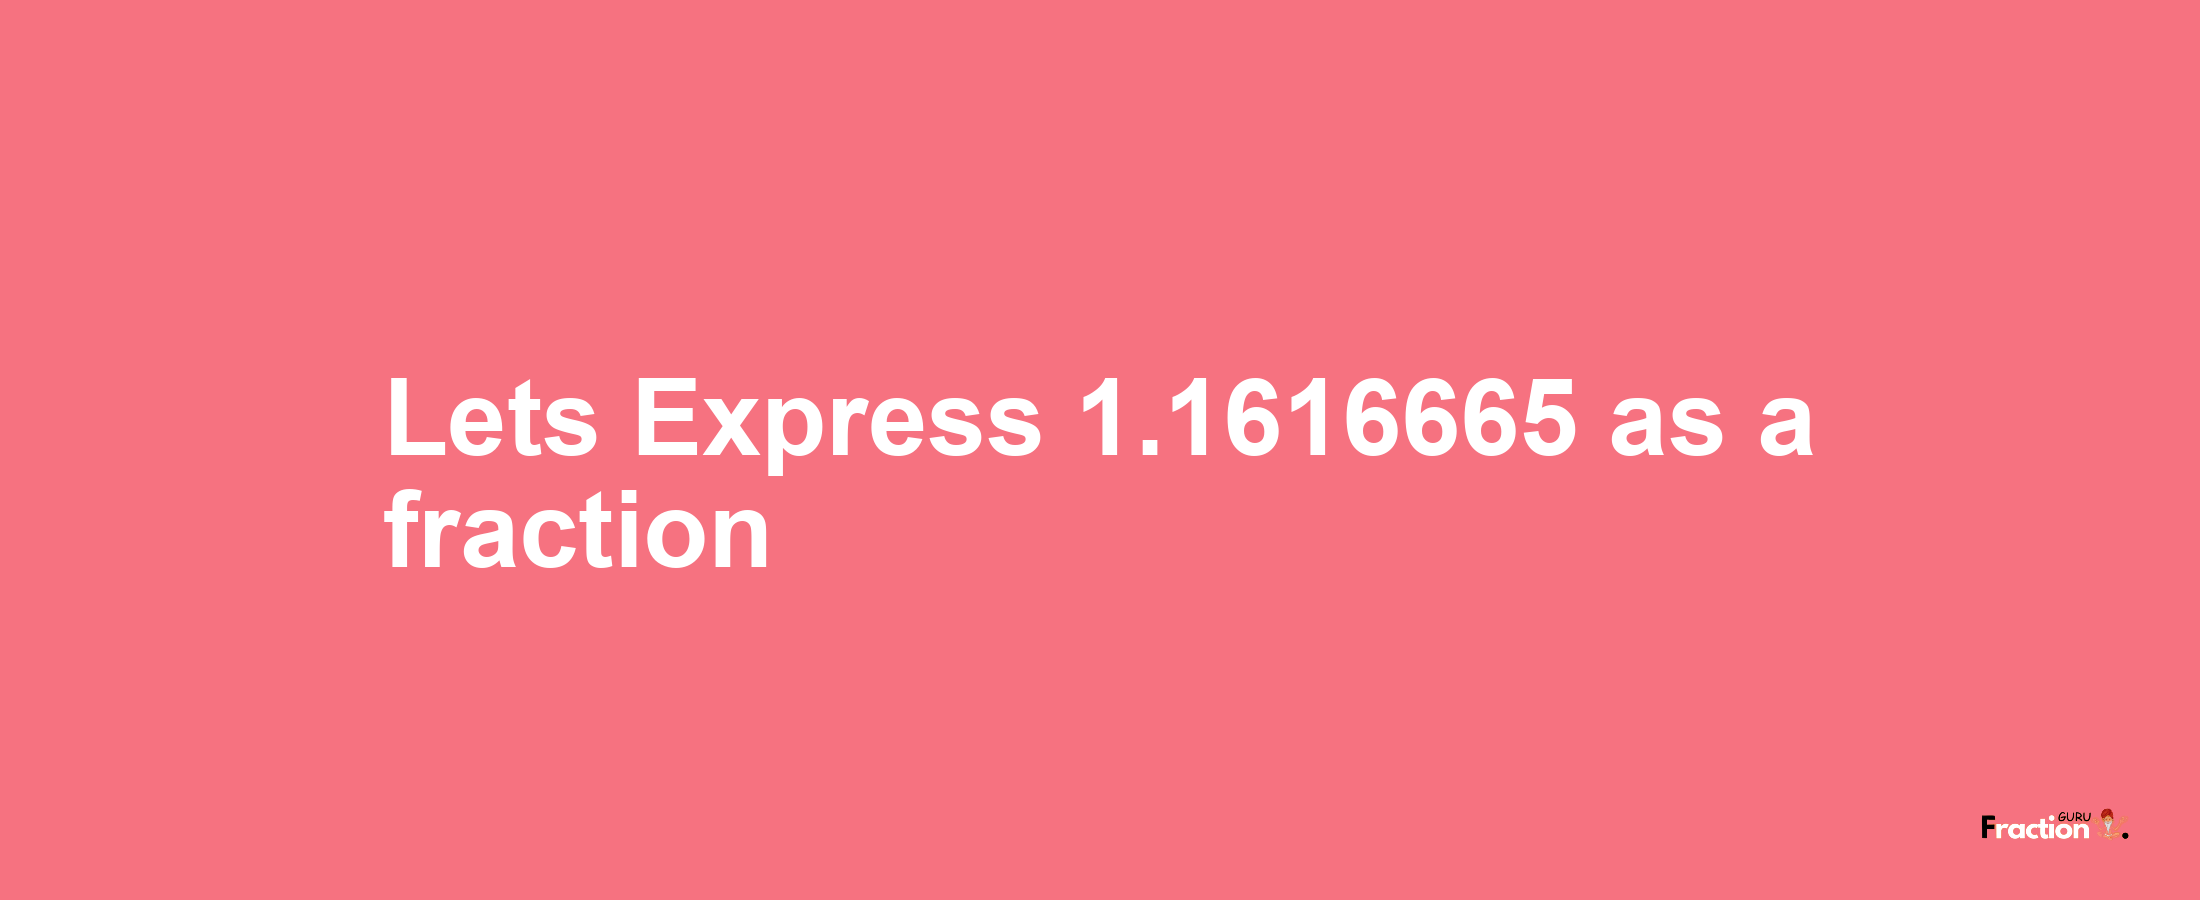 Lets Express 1.1616665 as afraction